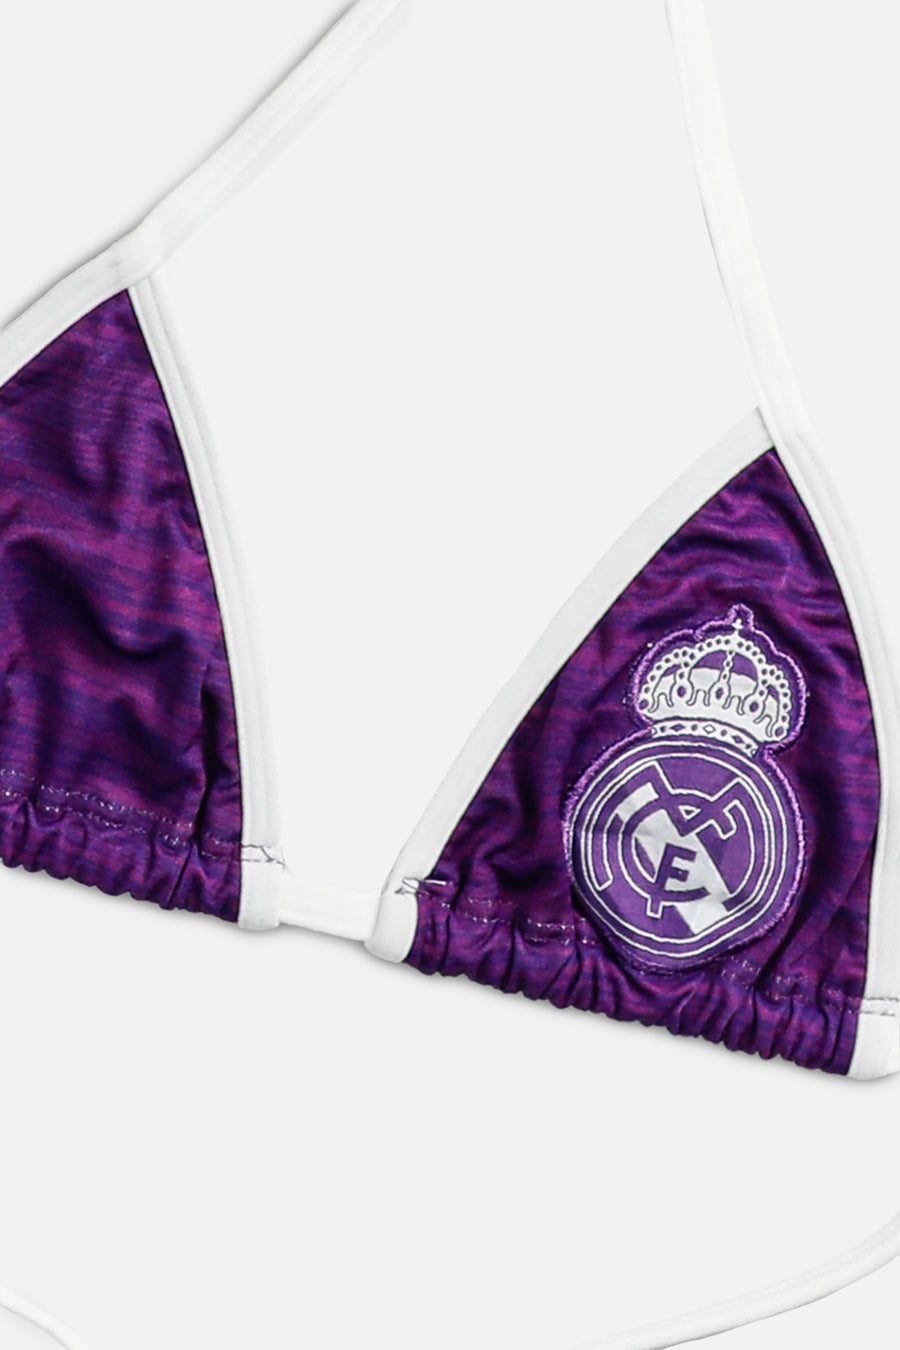 Rework Madrid Soccer Triangle Top - XS